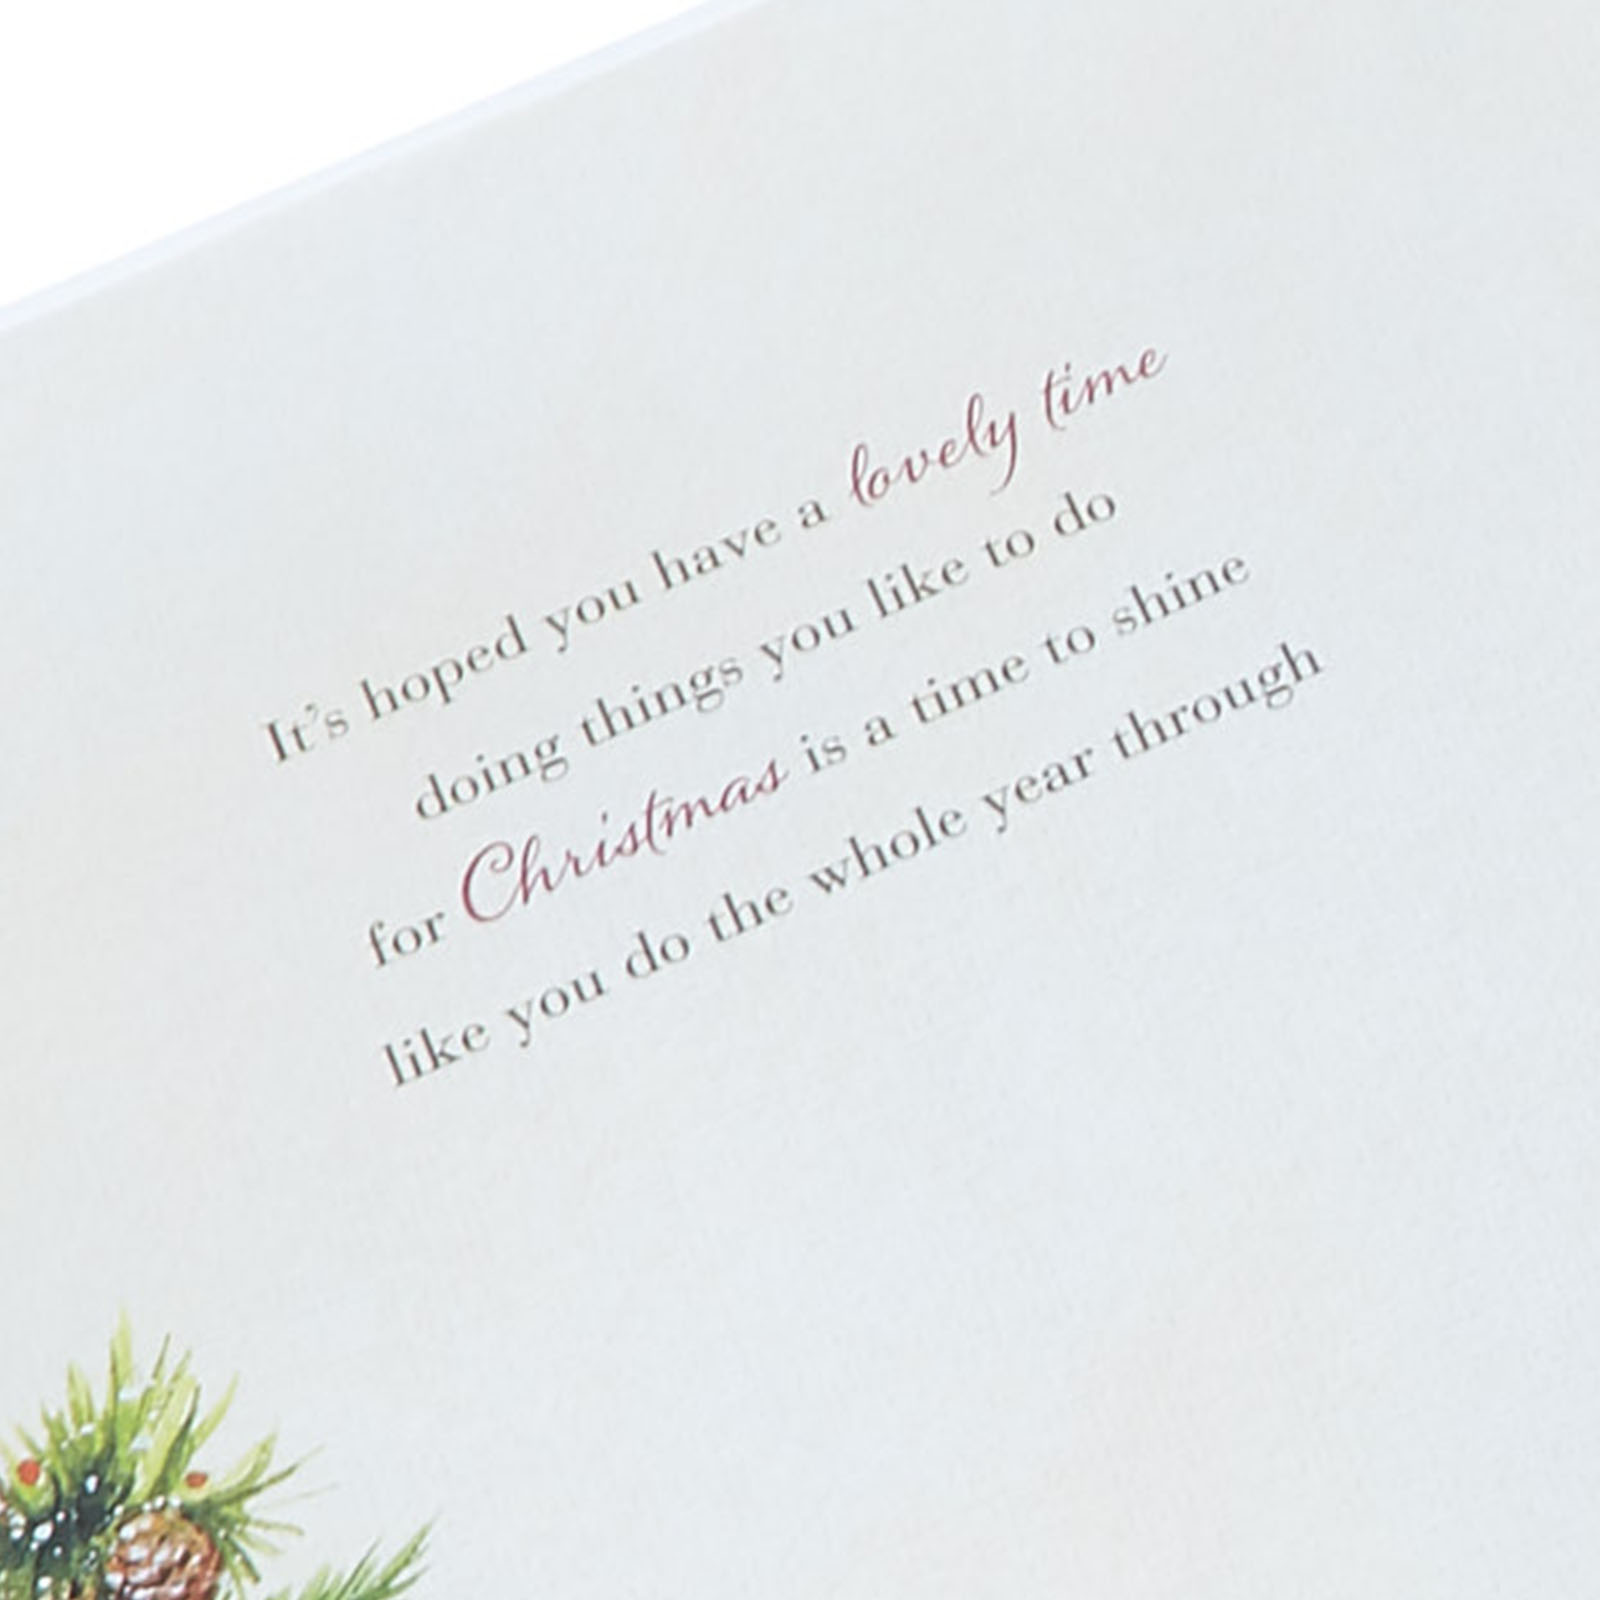 Christmas Card - For A Beautiful Daughter